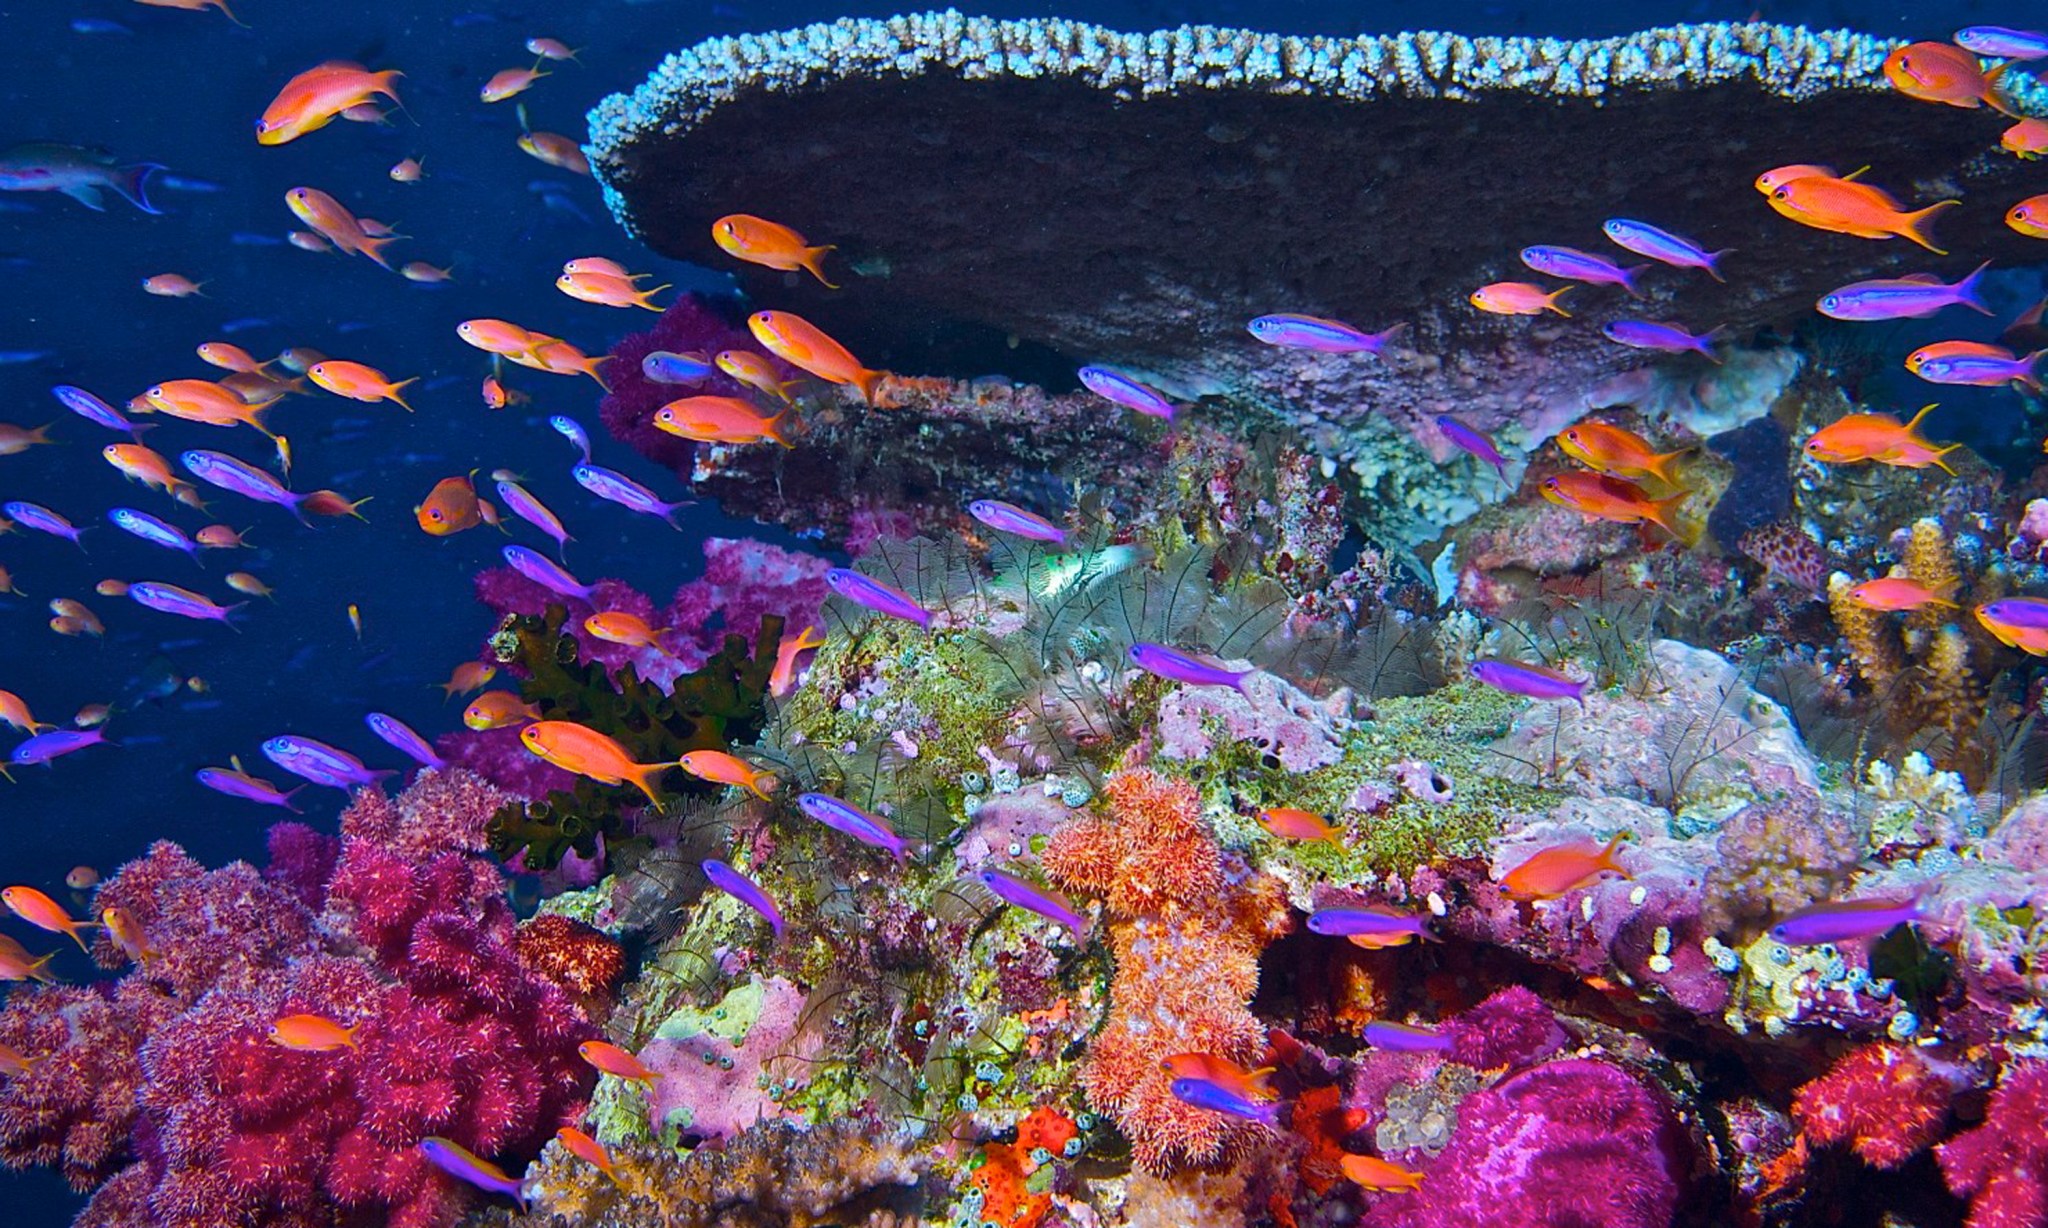 Bright, colorful image of orange and purple fish in a coral reef.